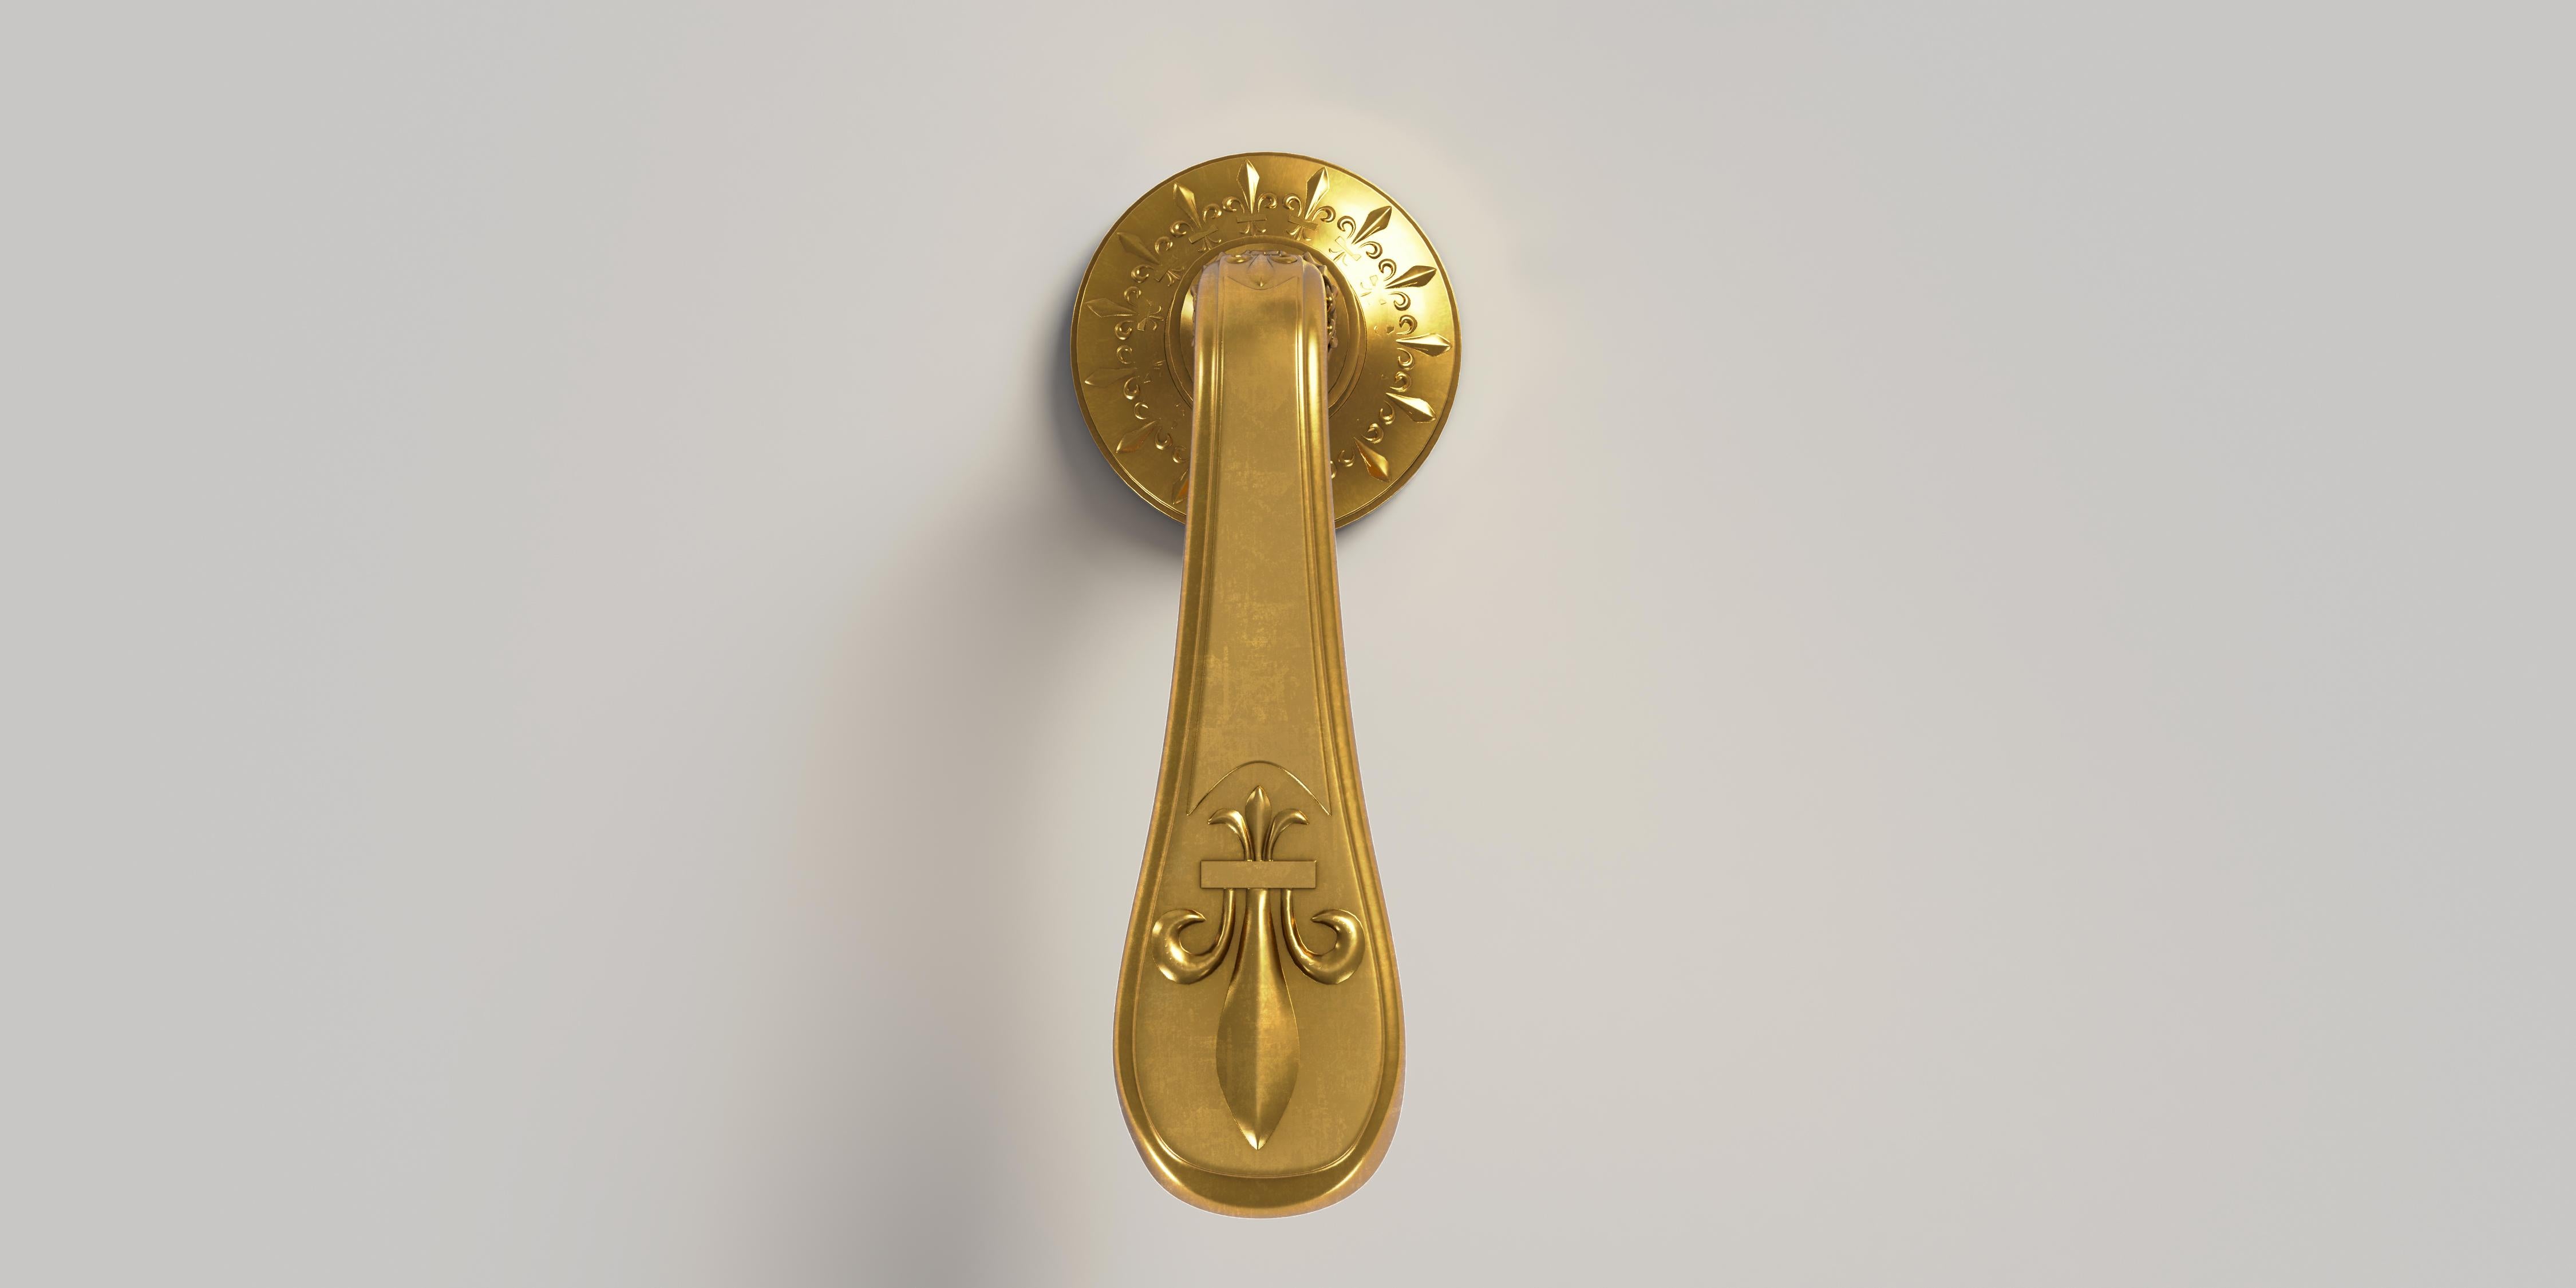 French Set Of 2 Versailles Doré Brass Door Handles With Condamnation by Jérôme Bugara For Sale